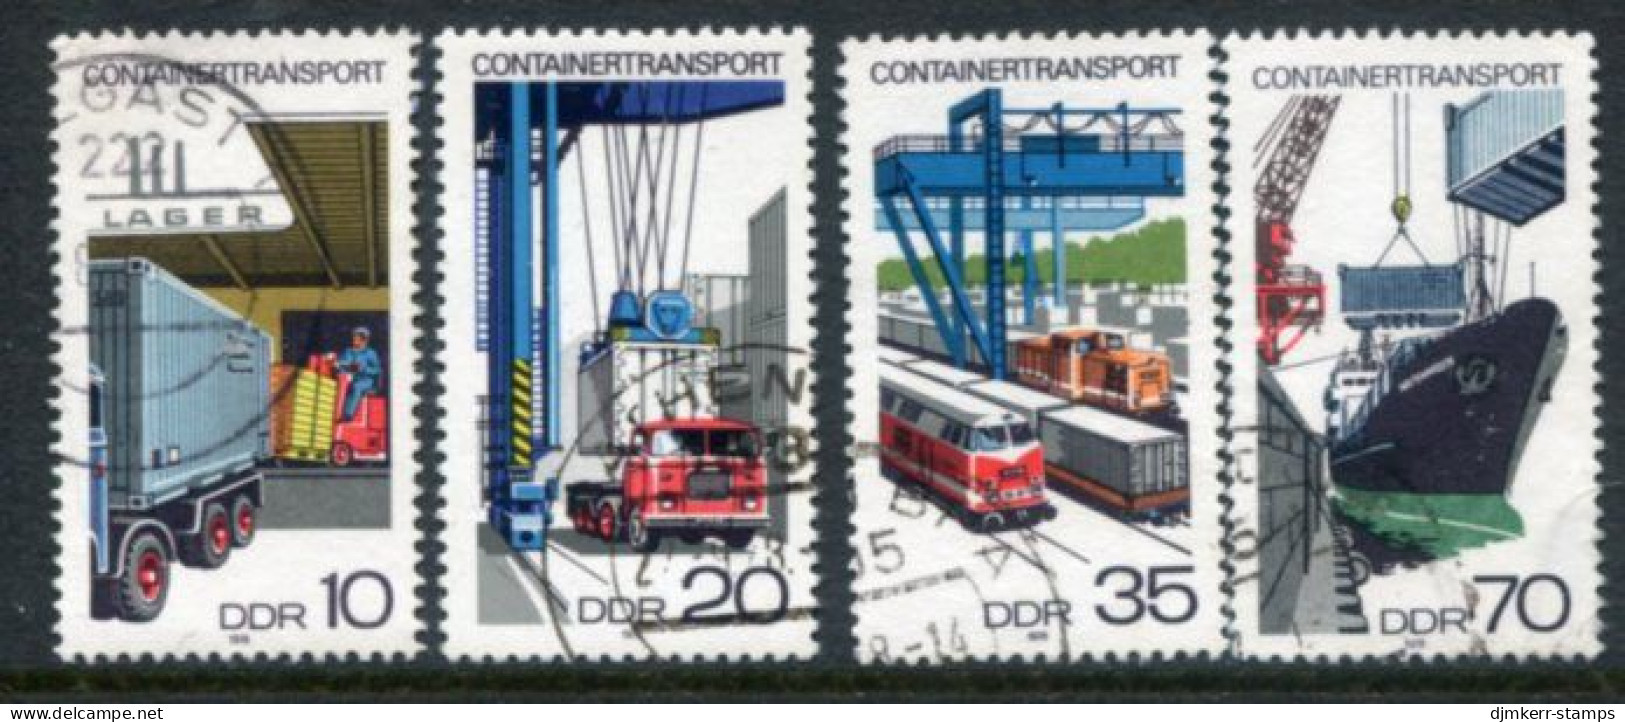 DDR / E. GERMANY 1978 Container Transport Used.  Michel 2326-29 - Gebraucht